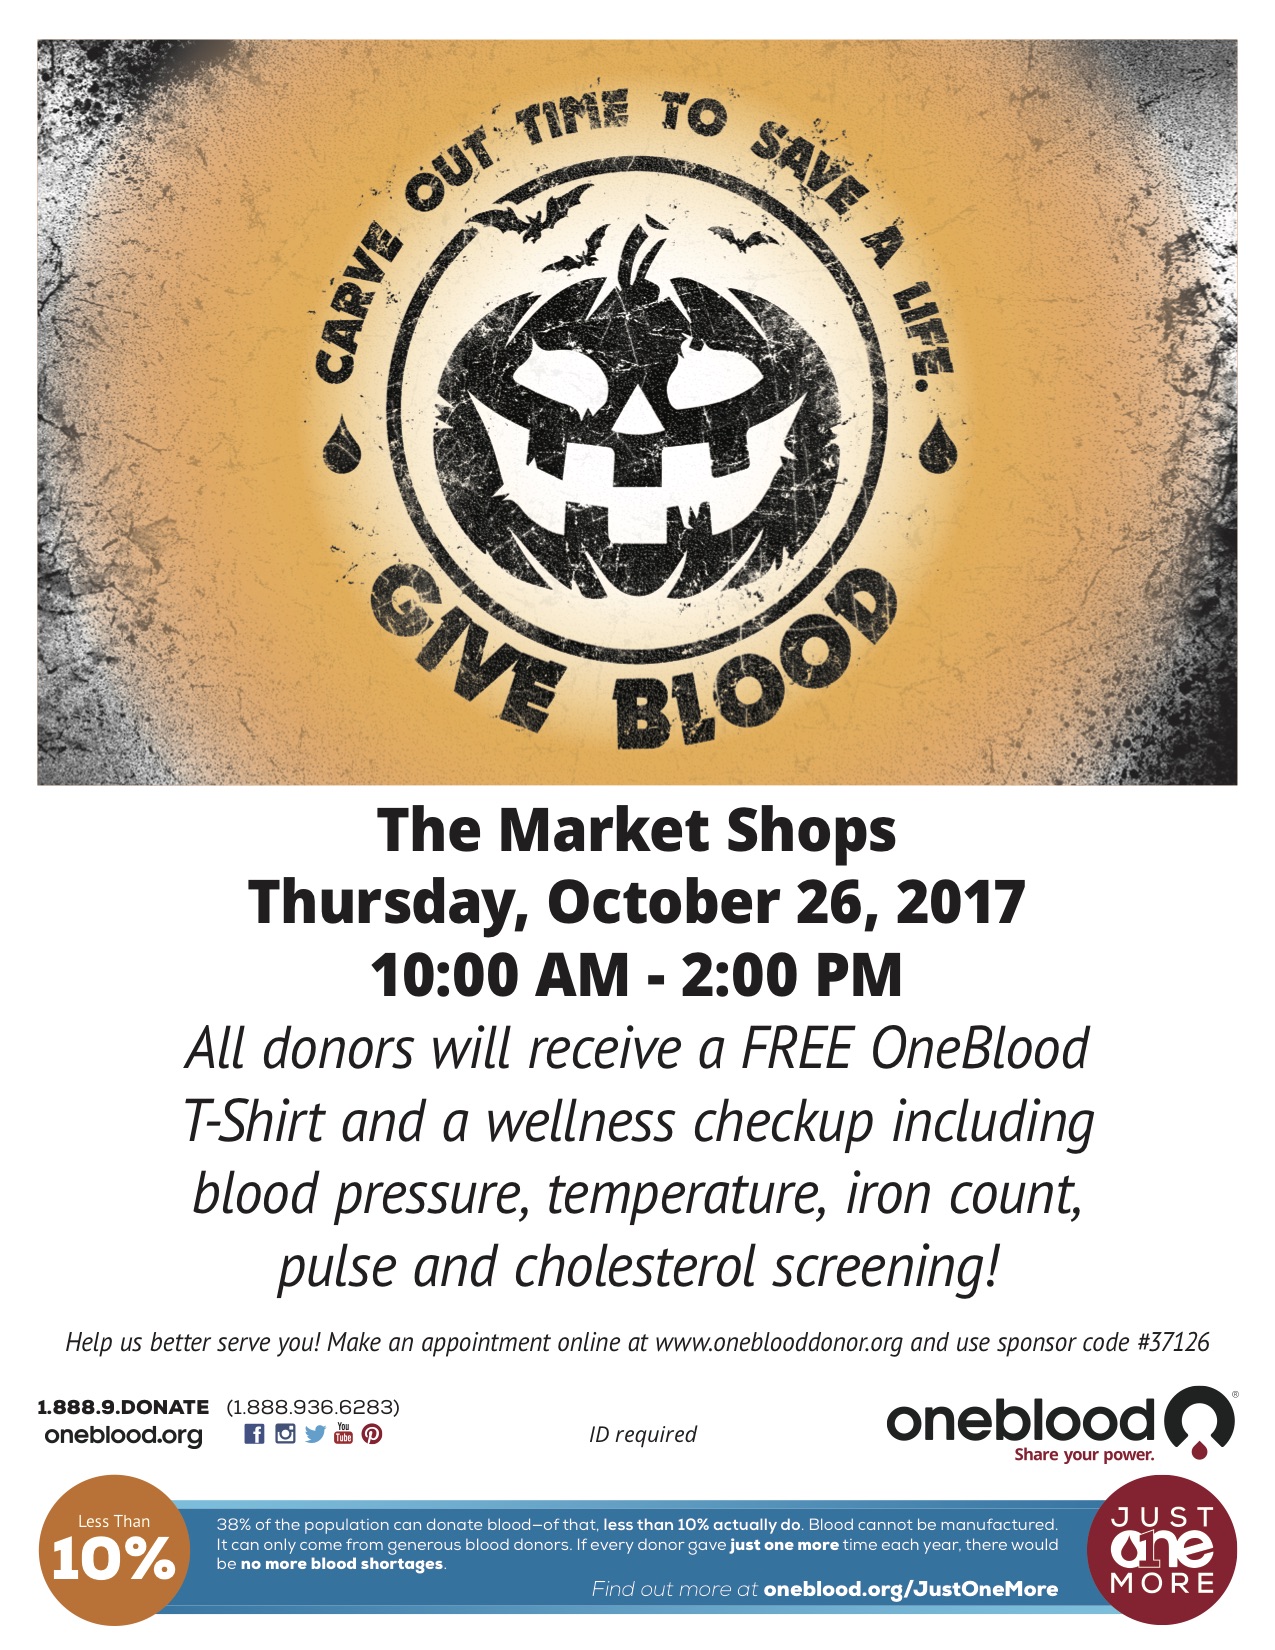 The Market Shops to Host OneBlood Drive